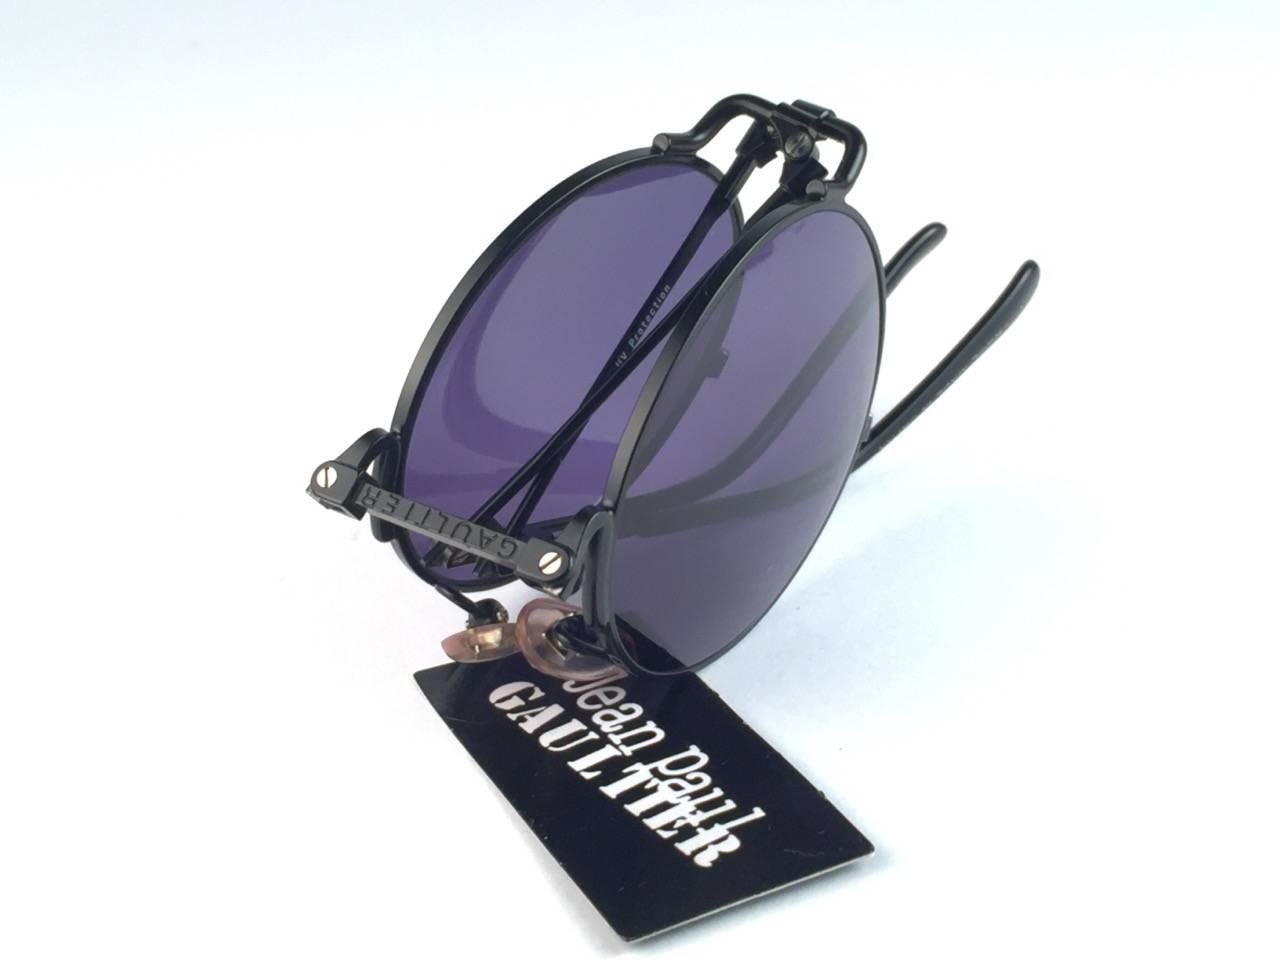 New Jean Paul Gaultier 56 9171 Round Black Foldable Frame. 
Dark Blue lenses that complete a ready to wear JPG look.

Amazing design with strong yet intricate details.
Design and produced in the 1900's.
New, never worn or displayed.
A true fashion